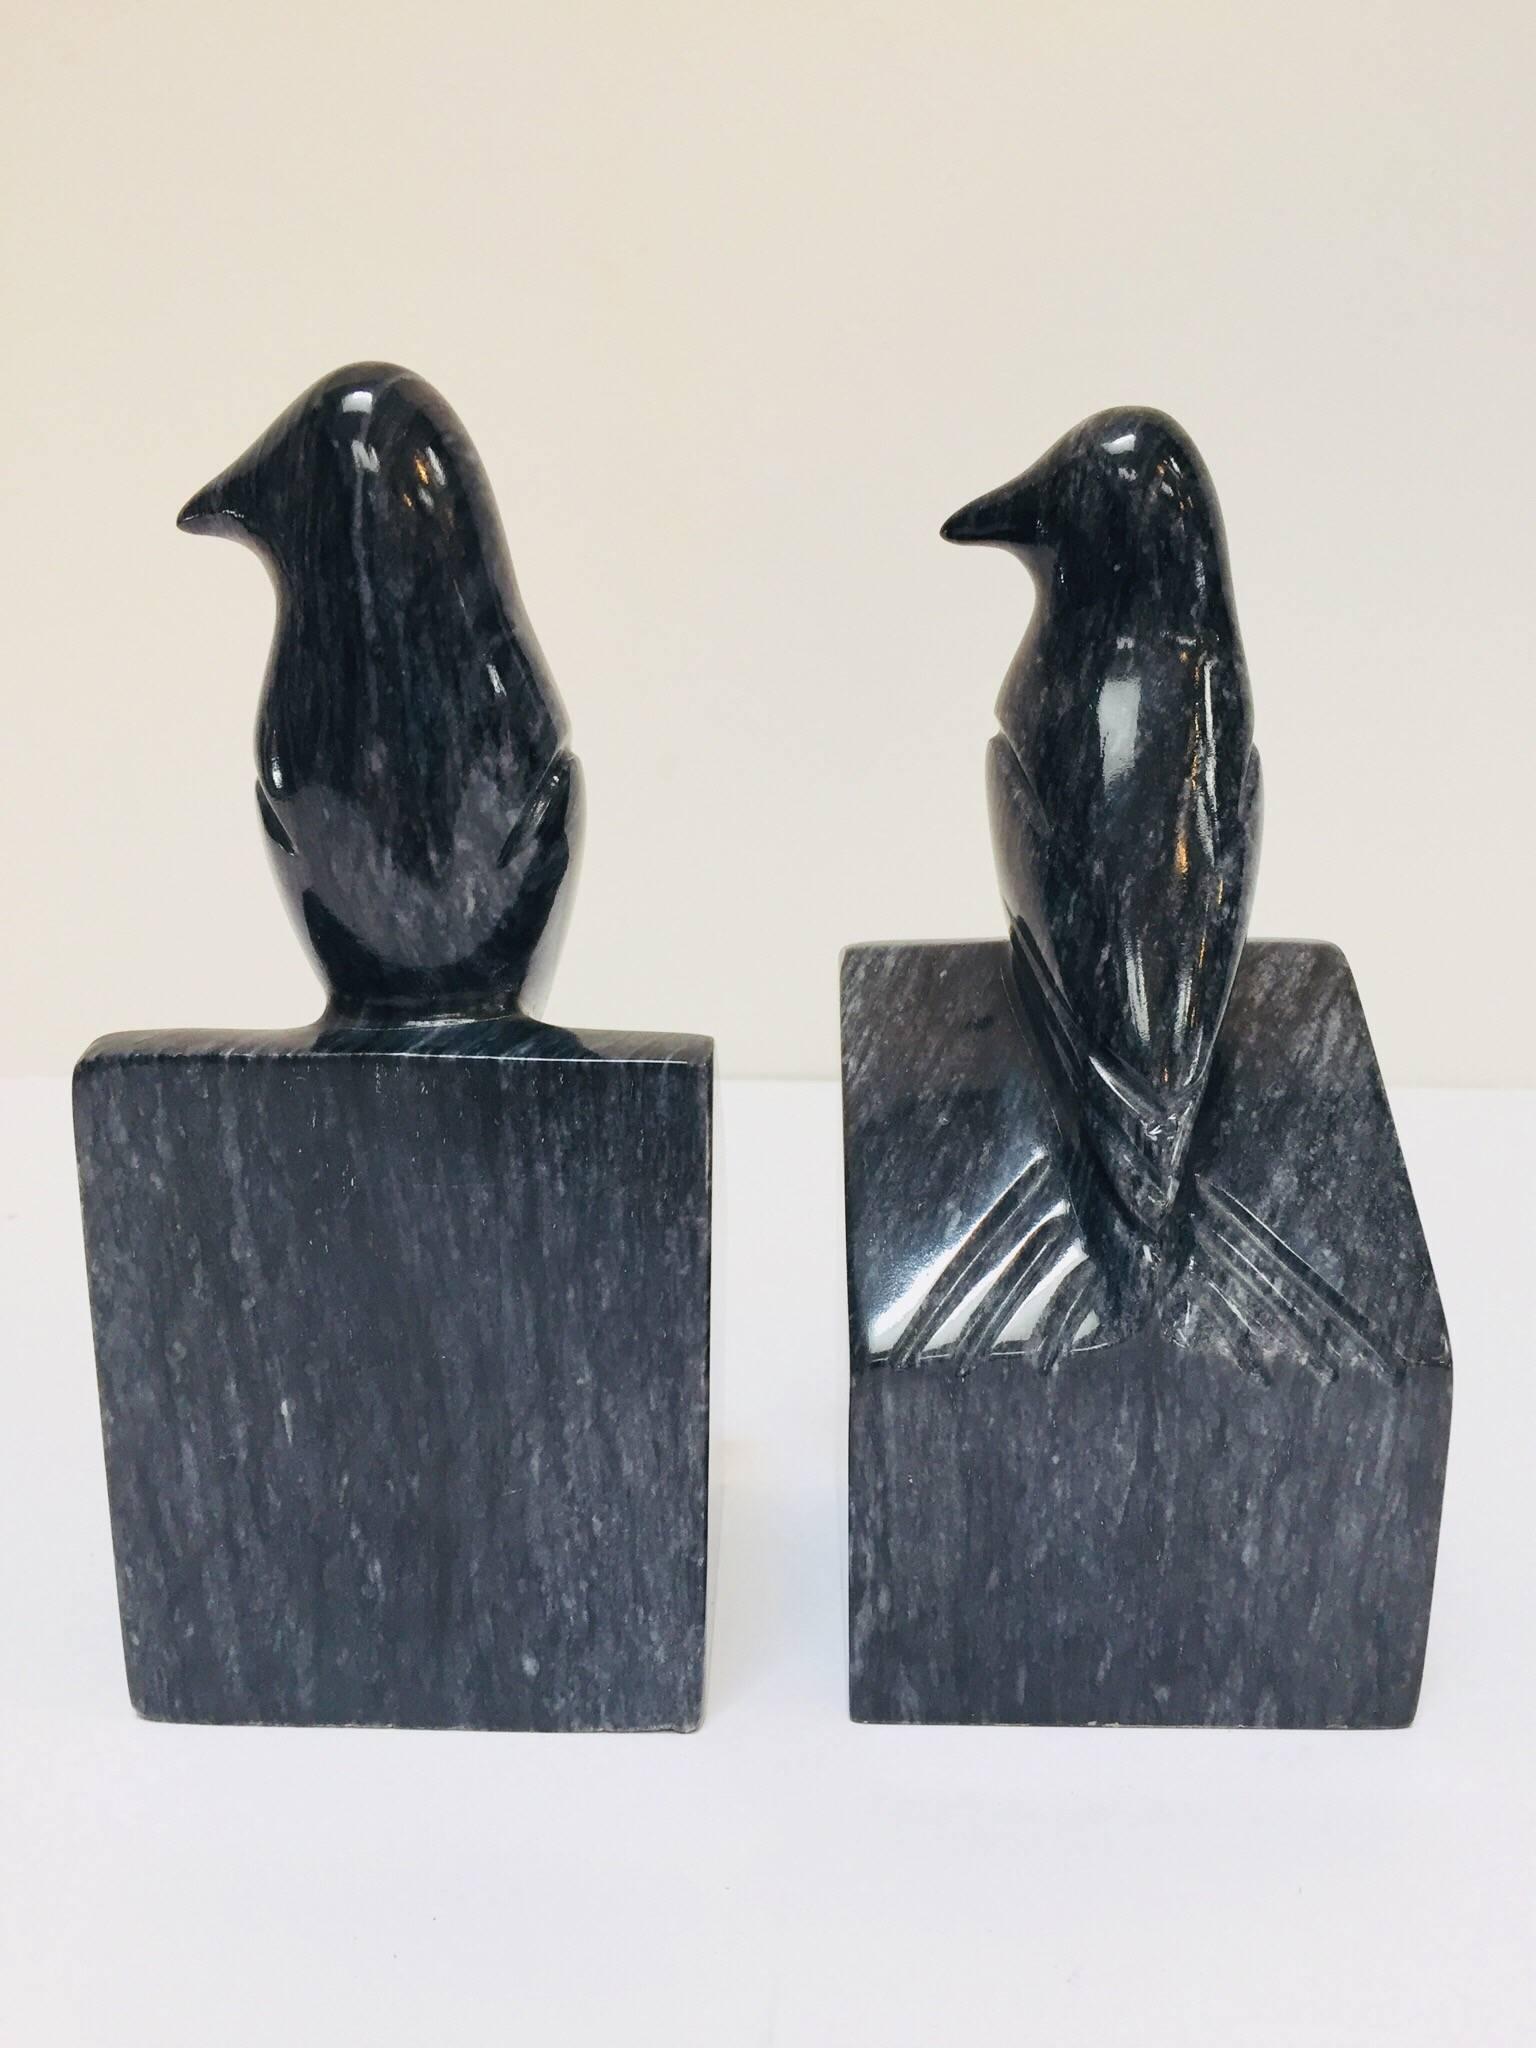 Hand-Crafted Pair of Modernist Art Deco Black Marble Birds Bookends